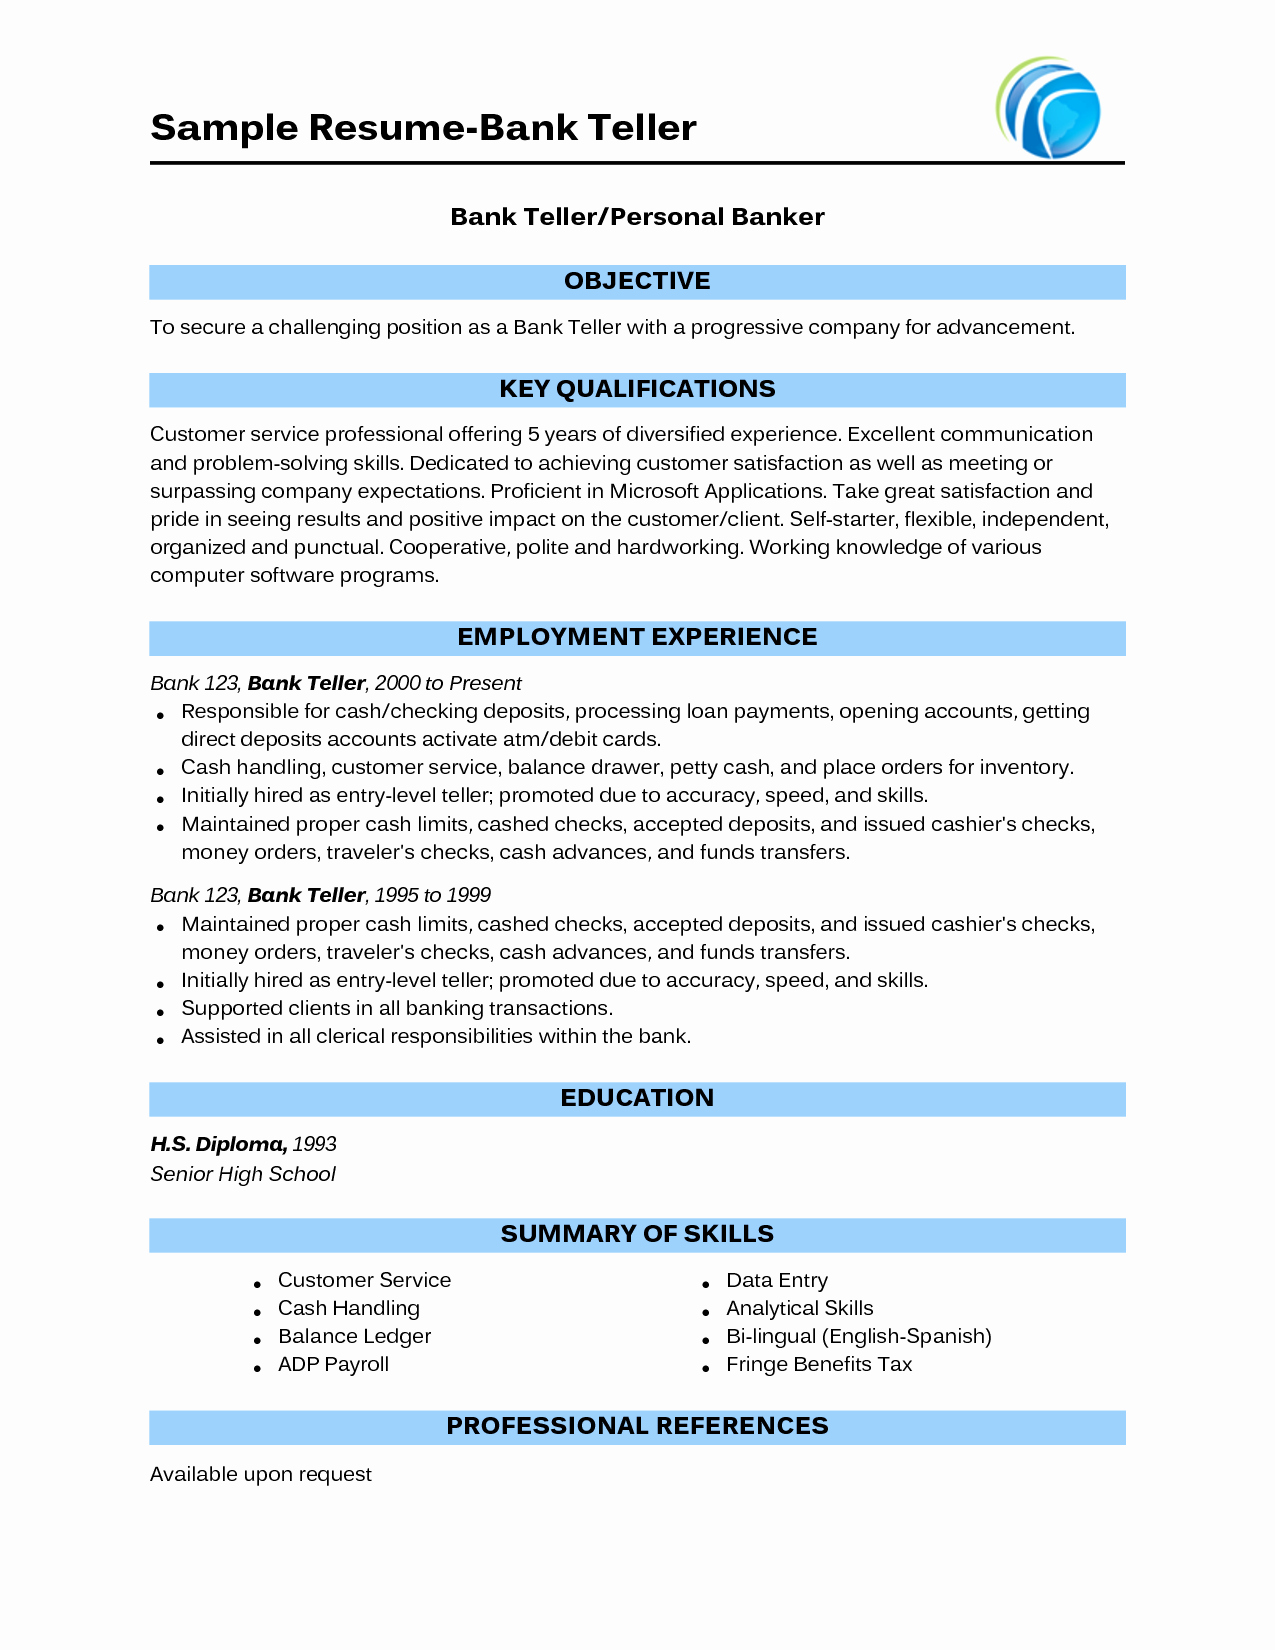 Sample Bank Teller Resume with No Experience